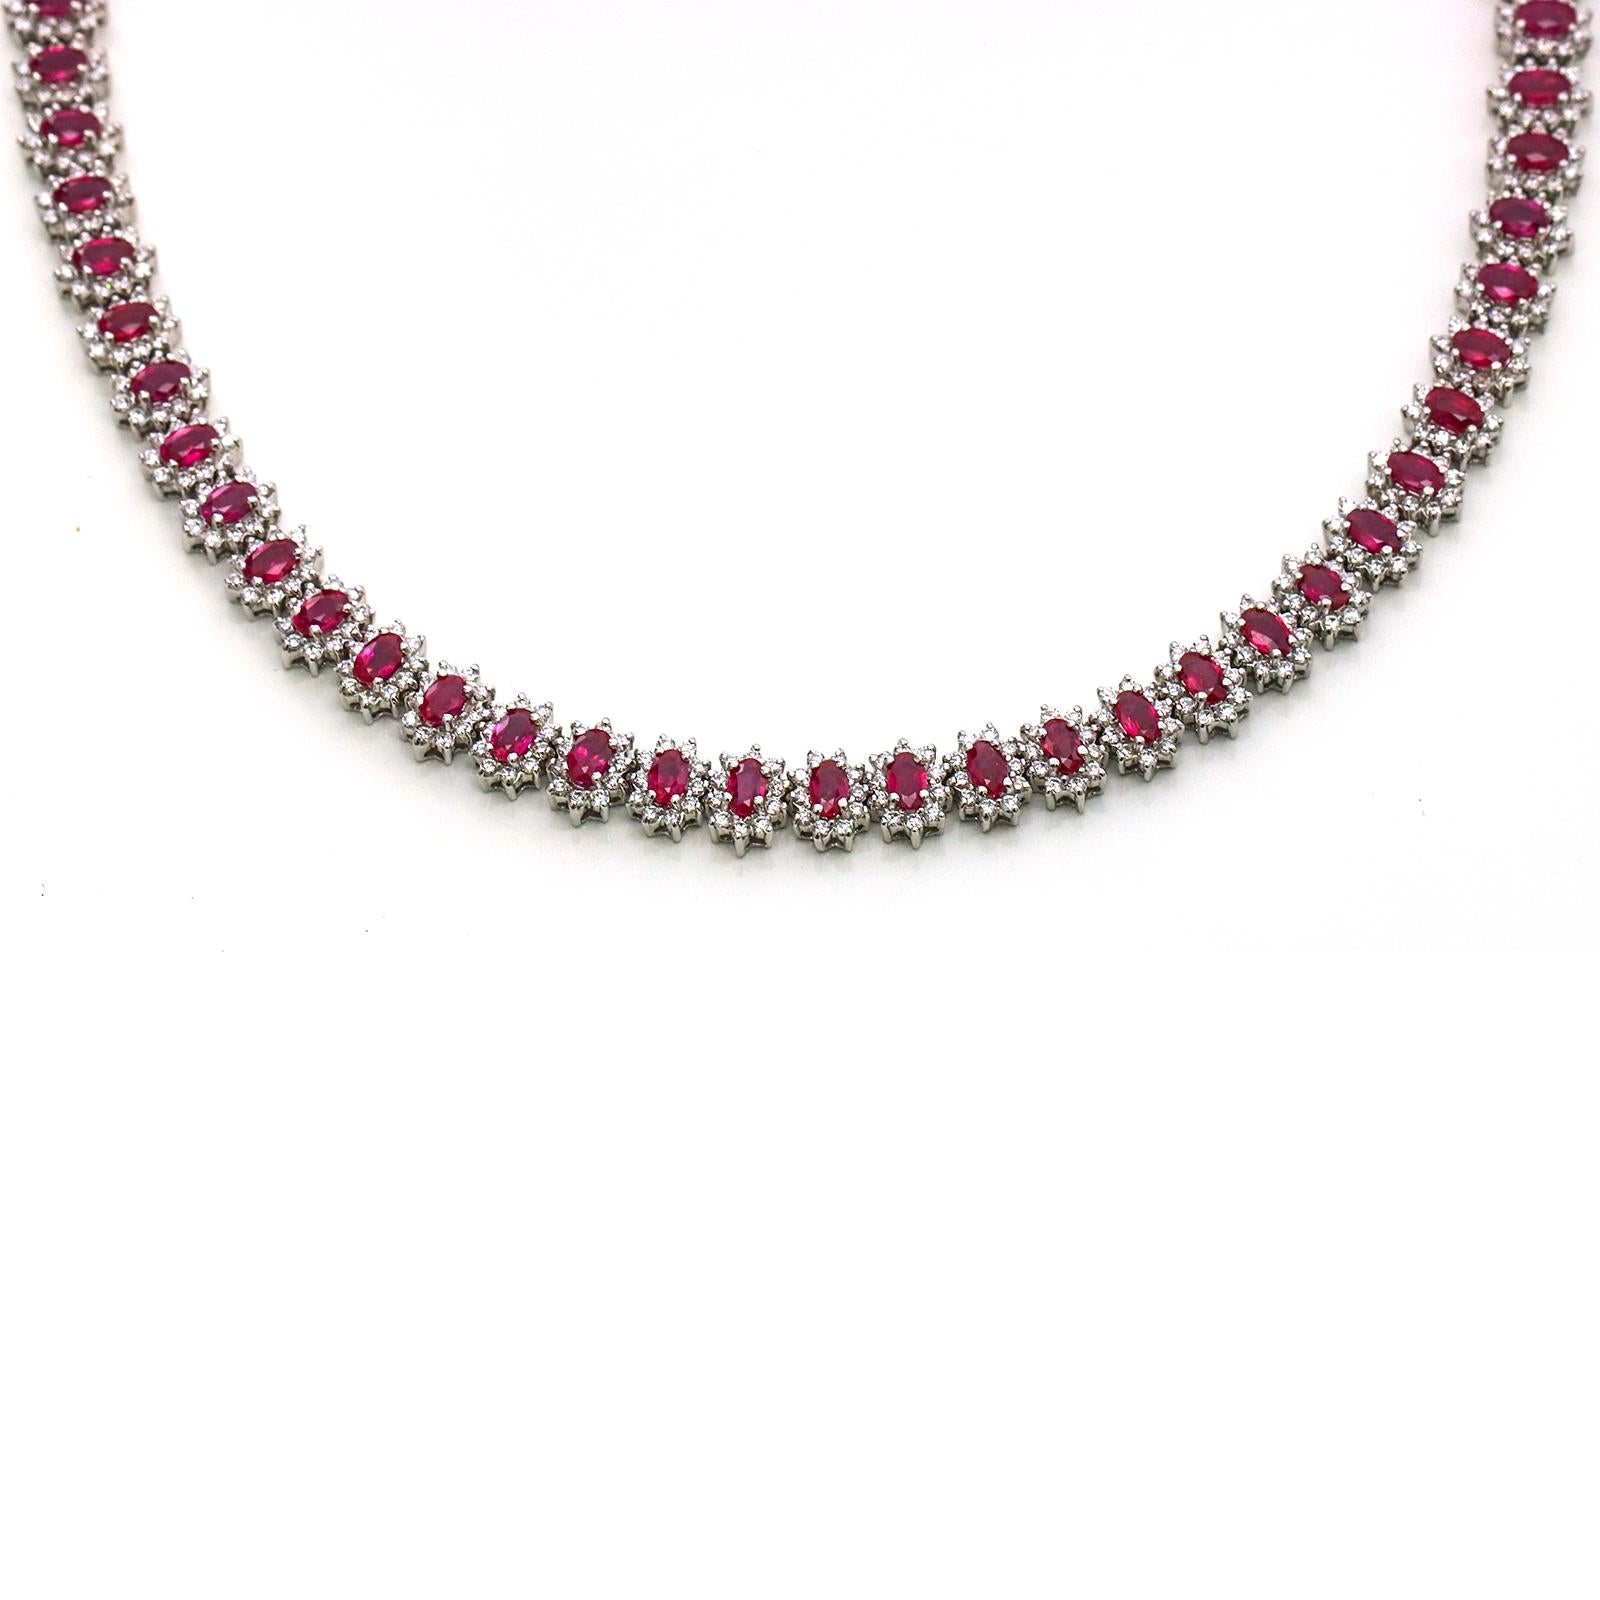 Ruby and diamond necklace in 14-karat white gold with GemLab appraisal. The necklace has 64 oval faceted natural Burma rubies, and 640 round-cut colorless to near-colorless diamonds. The appraisal value $64,000.

Ruby total carat weight, 18.00